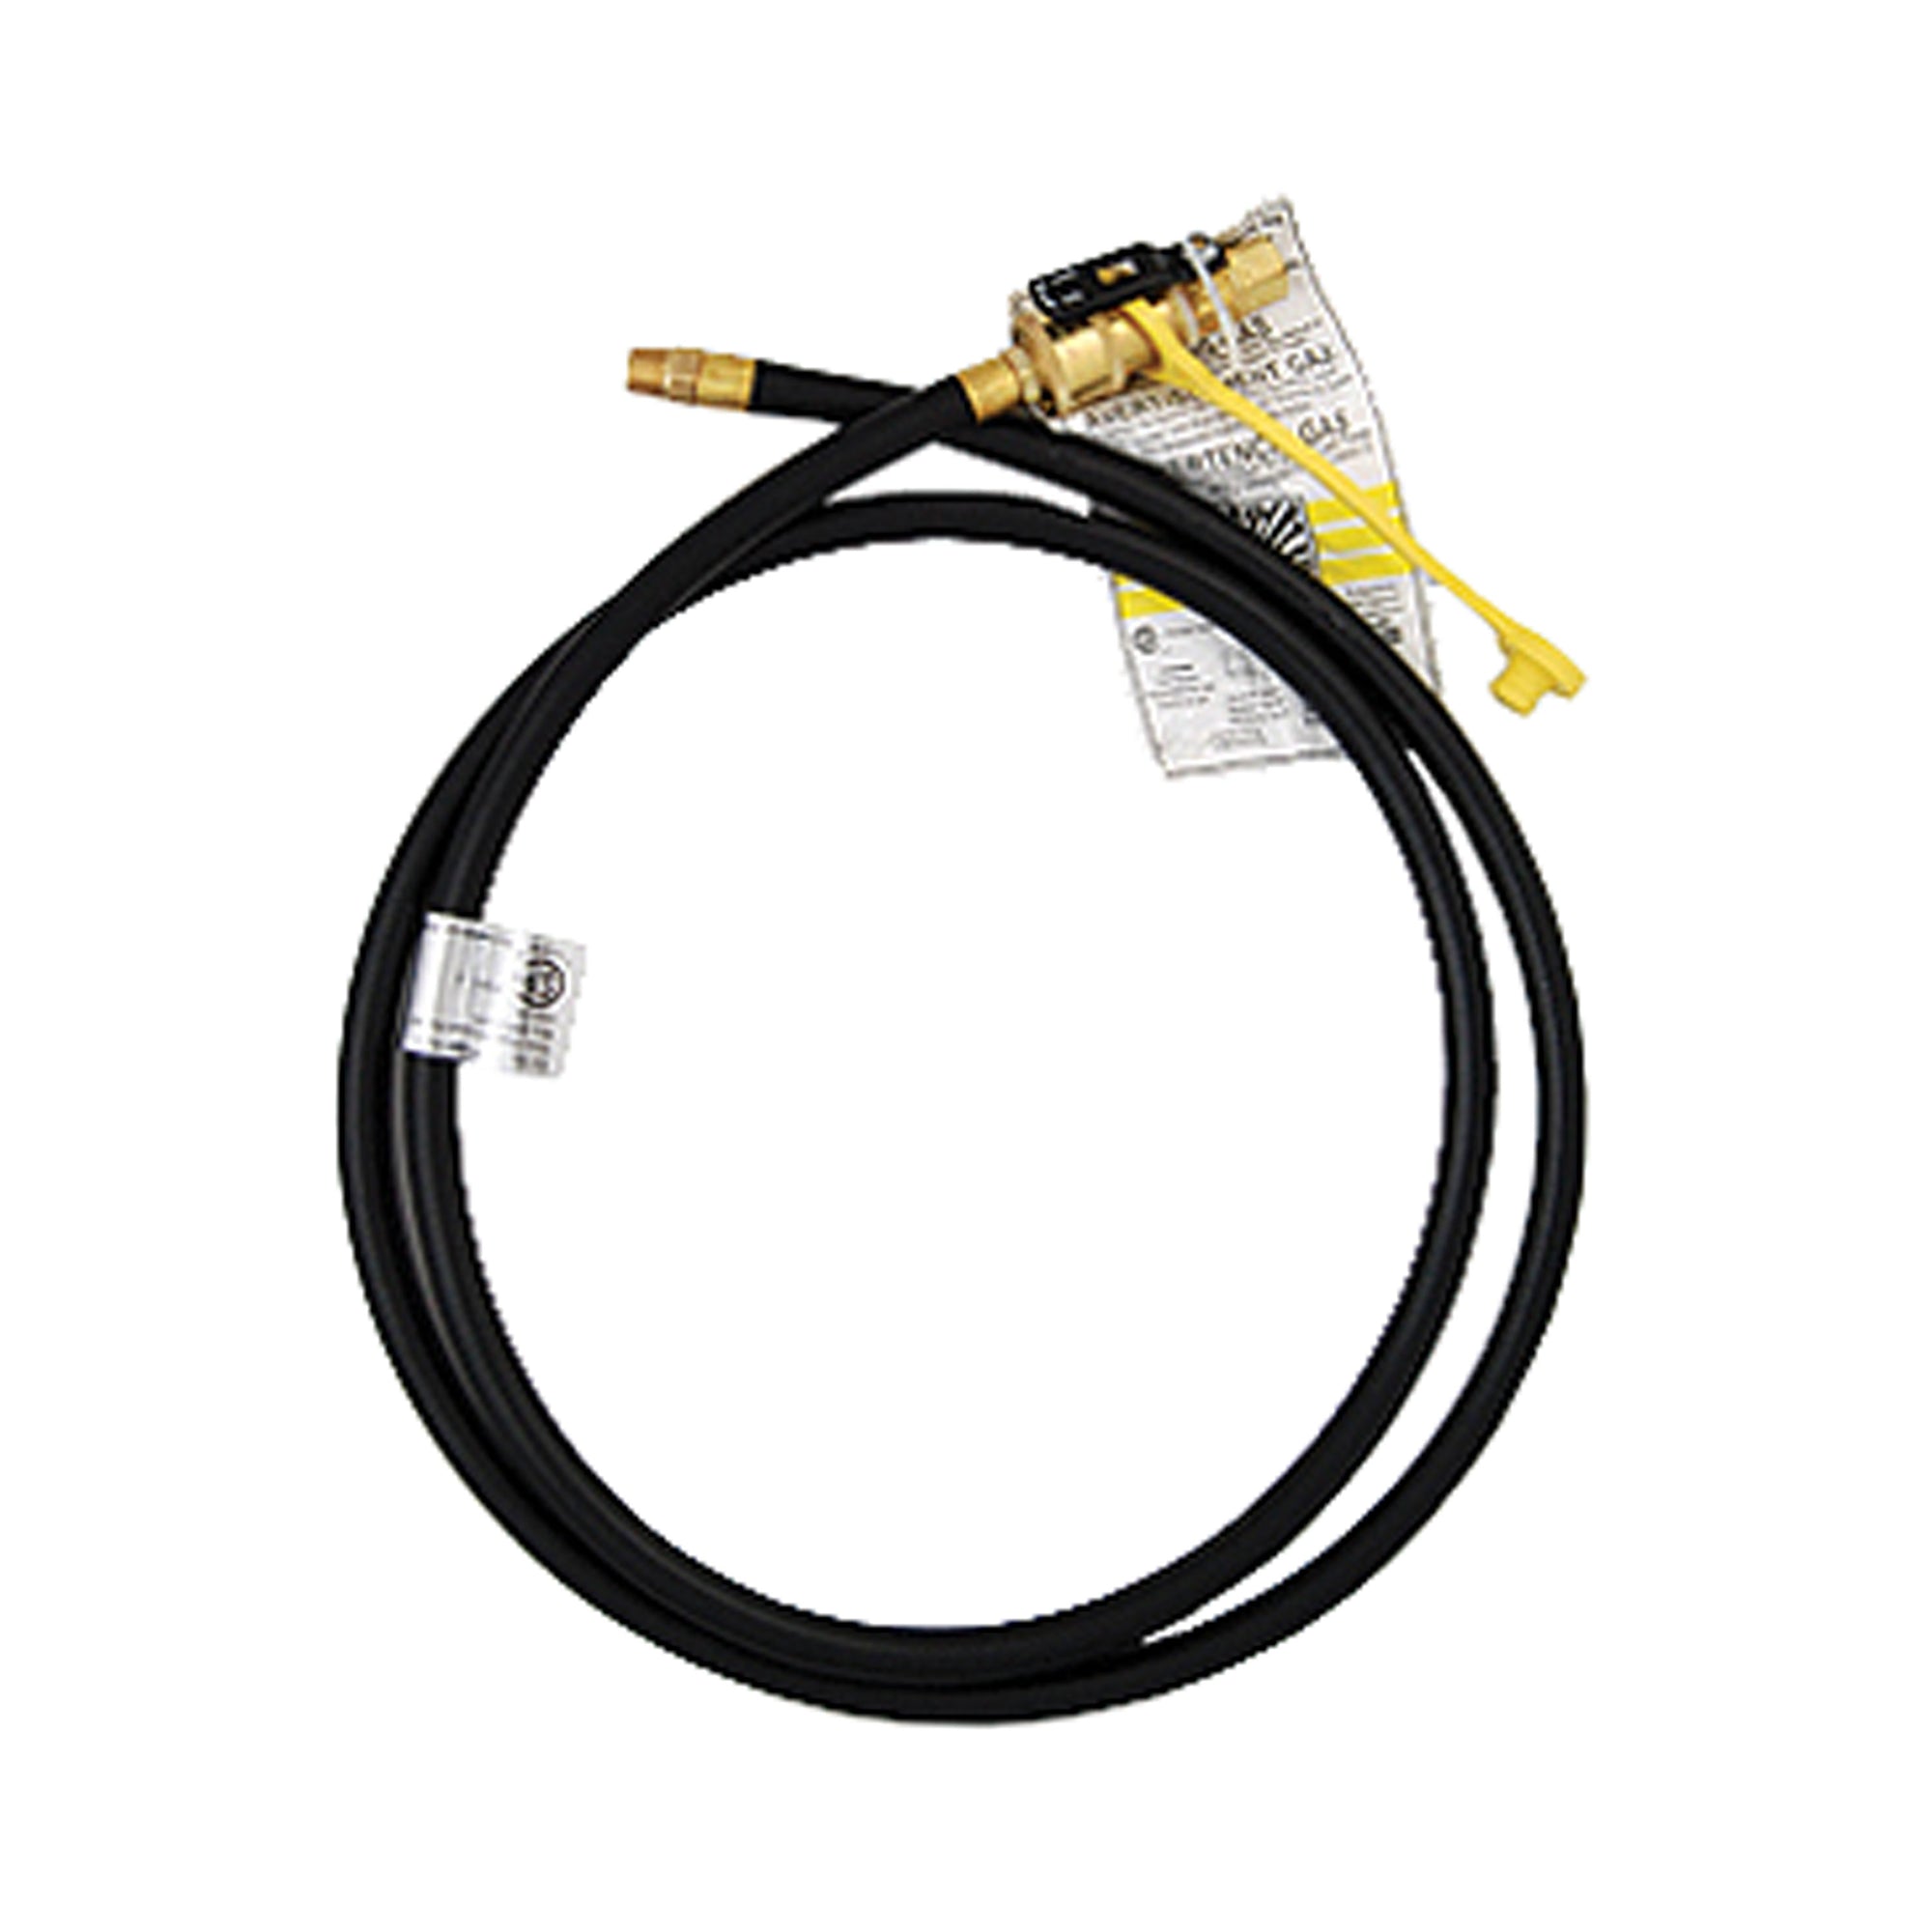 Marshall Excelsior MER14TCMQD6FS-72 High Pressure LP Hose with 0.25" ID QD Male Nipple x 0.375" FFS Connections - 72" Length